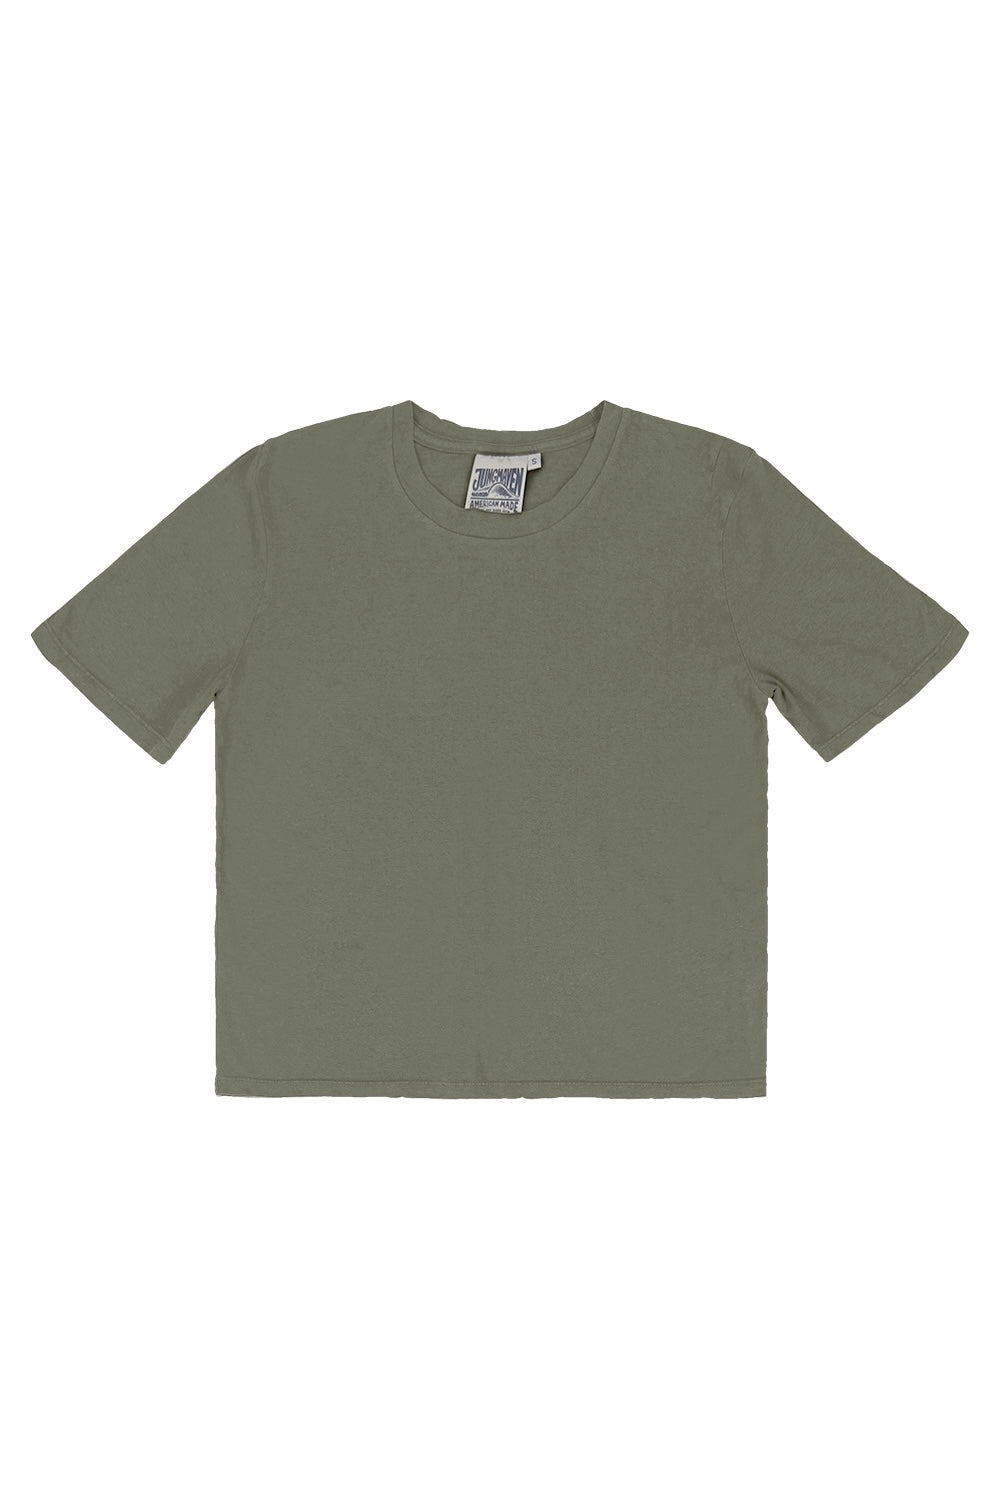 Silverlake Cropped Tee | Jungmaven Hemp Clothing & Accessories / Color:Olive Green